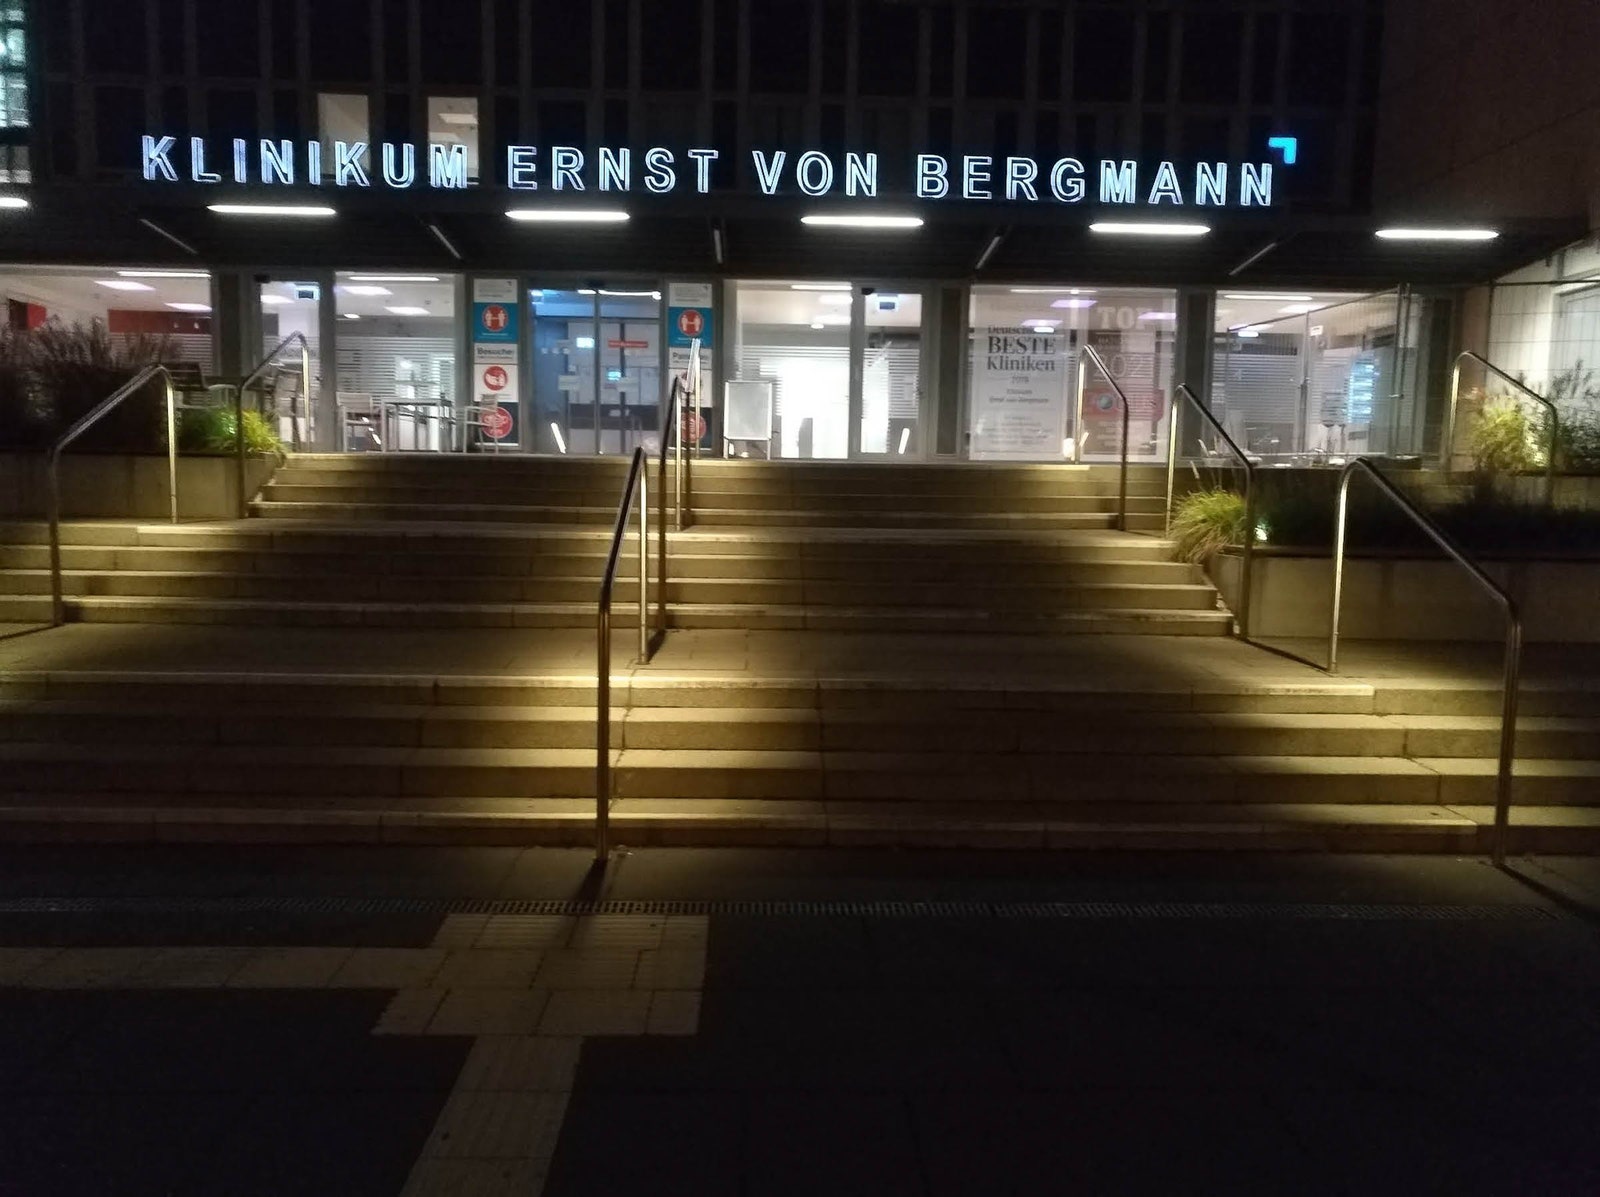 An outdoor stairway with dim lights illuminating it